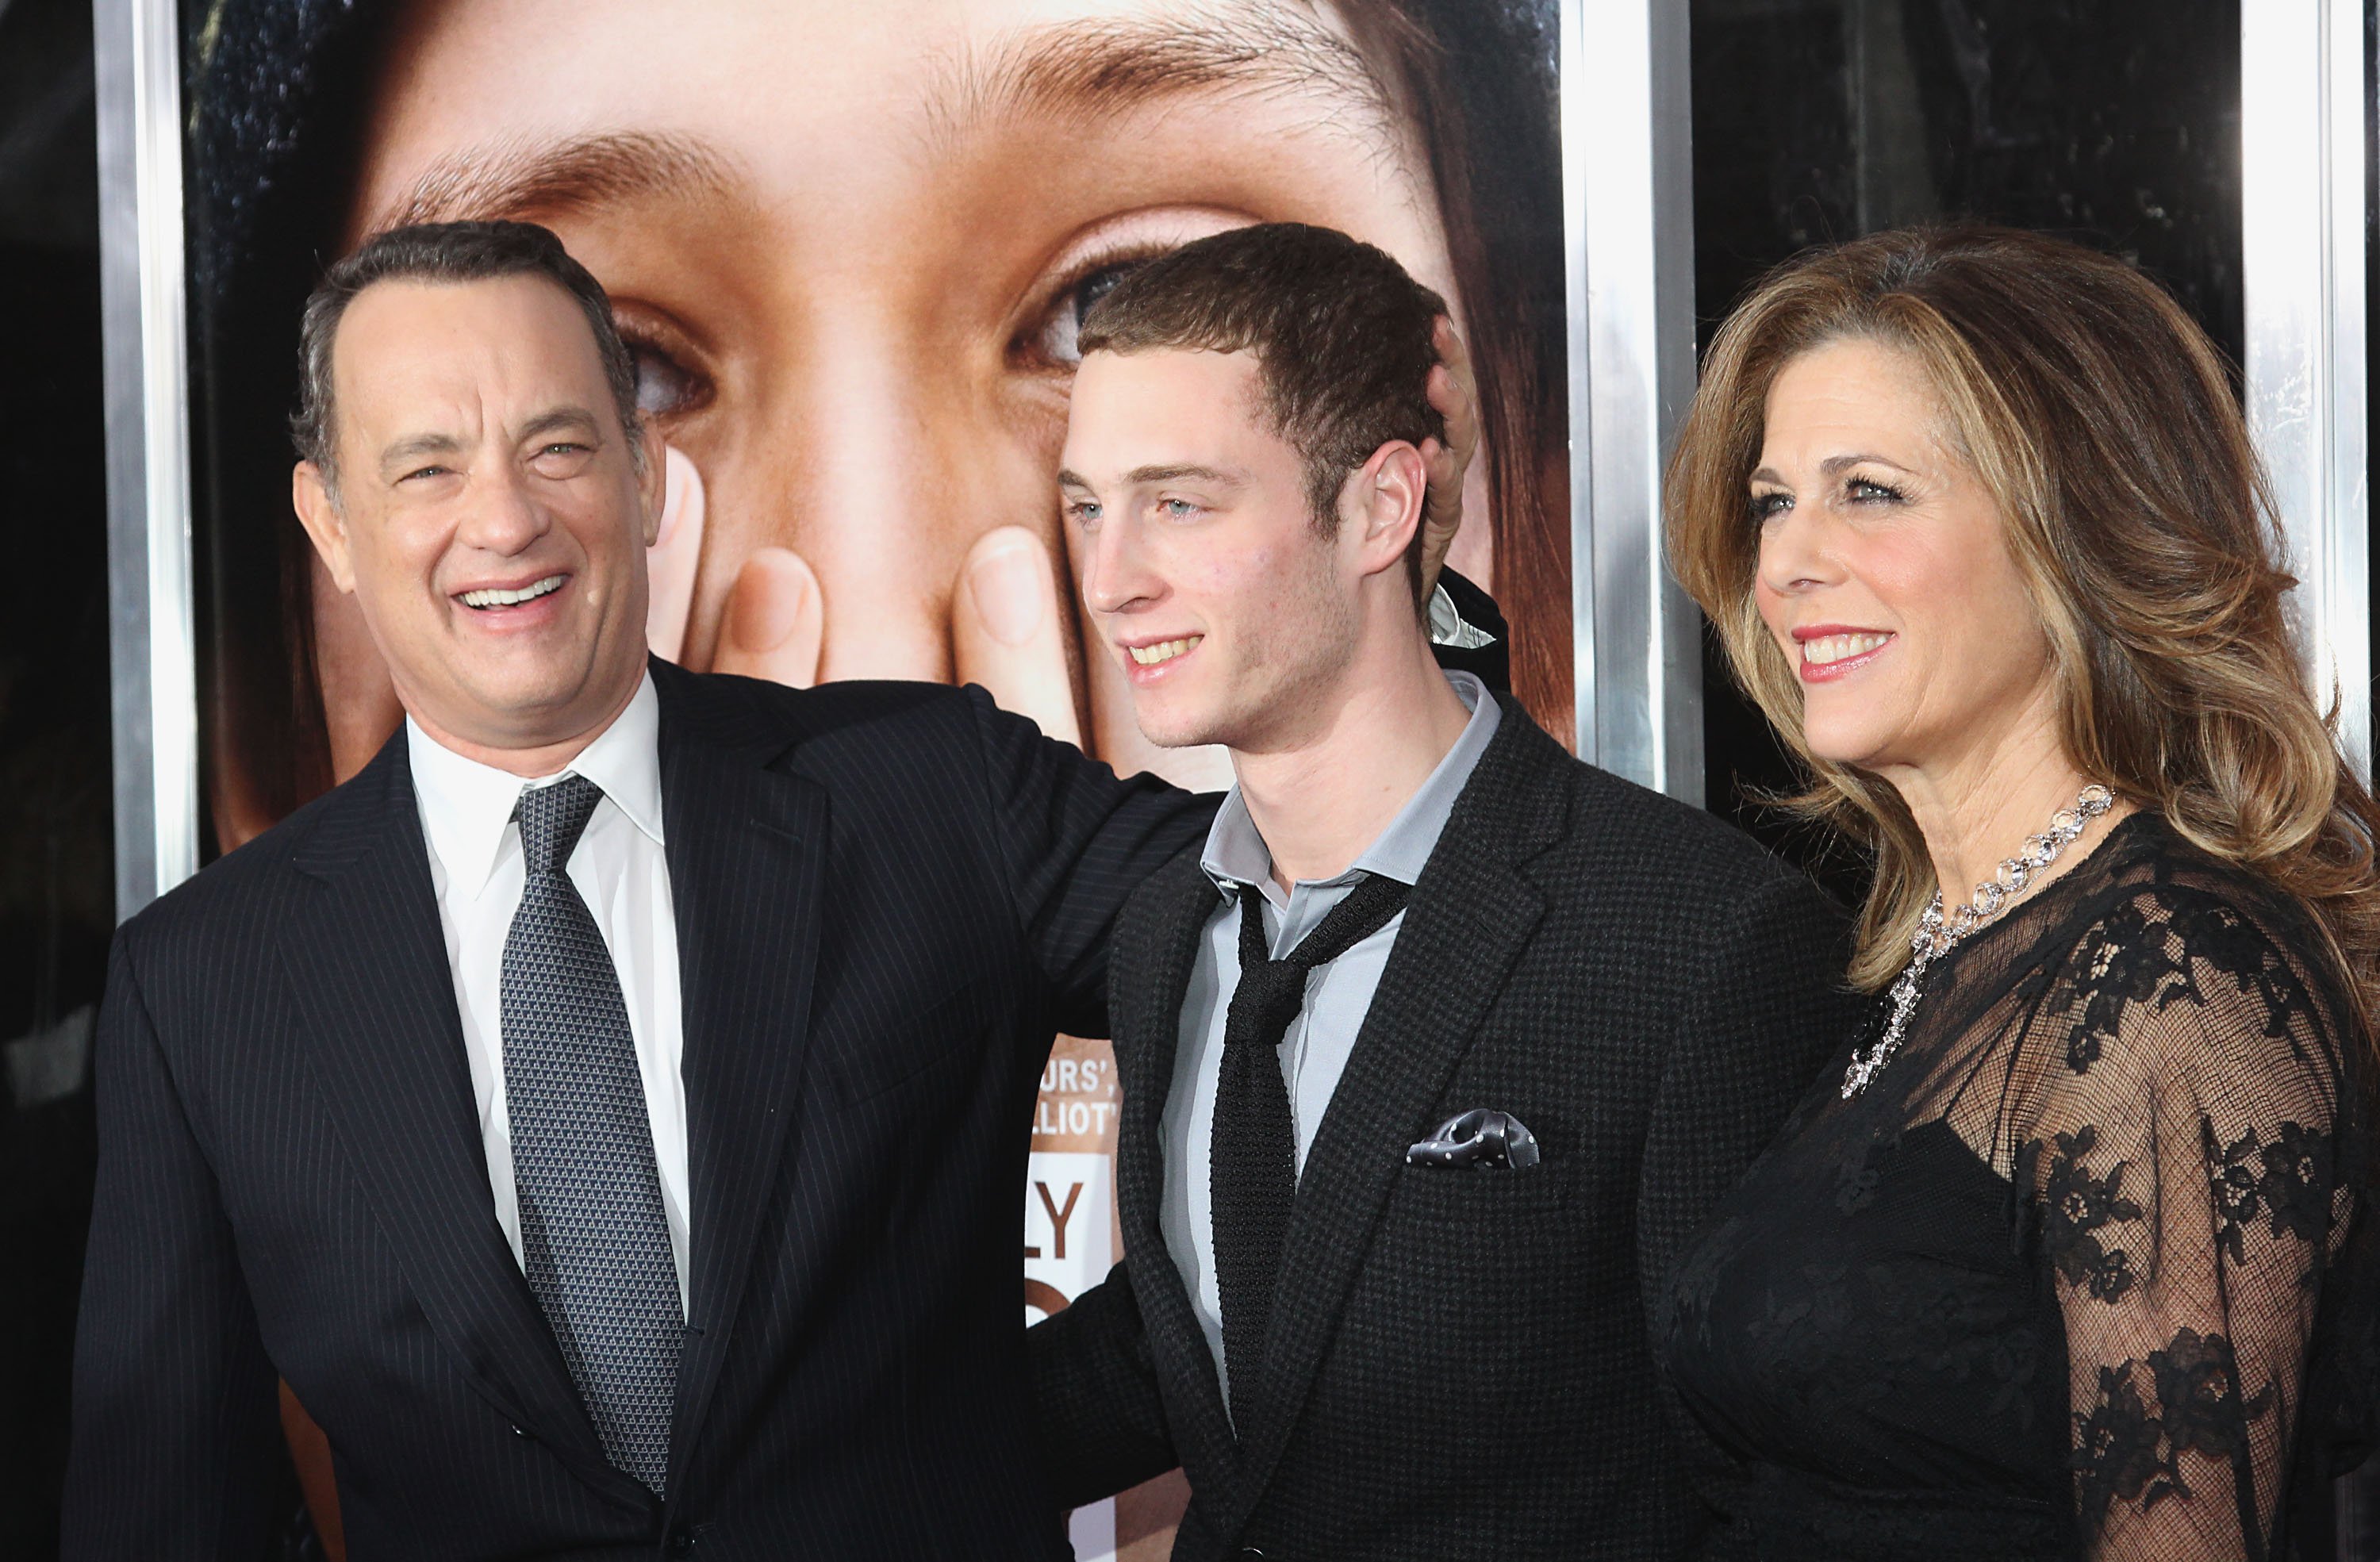  Tom Hanks, son Chester Hanks and Rita Wilson attend the "Extremely Loud & Incredibly Close" New York premiere at the Ziegfeld Theater on December 15, 2011 in New York City | Source: Getty Images